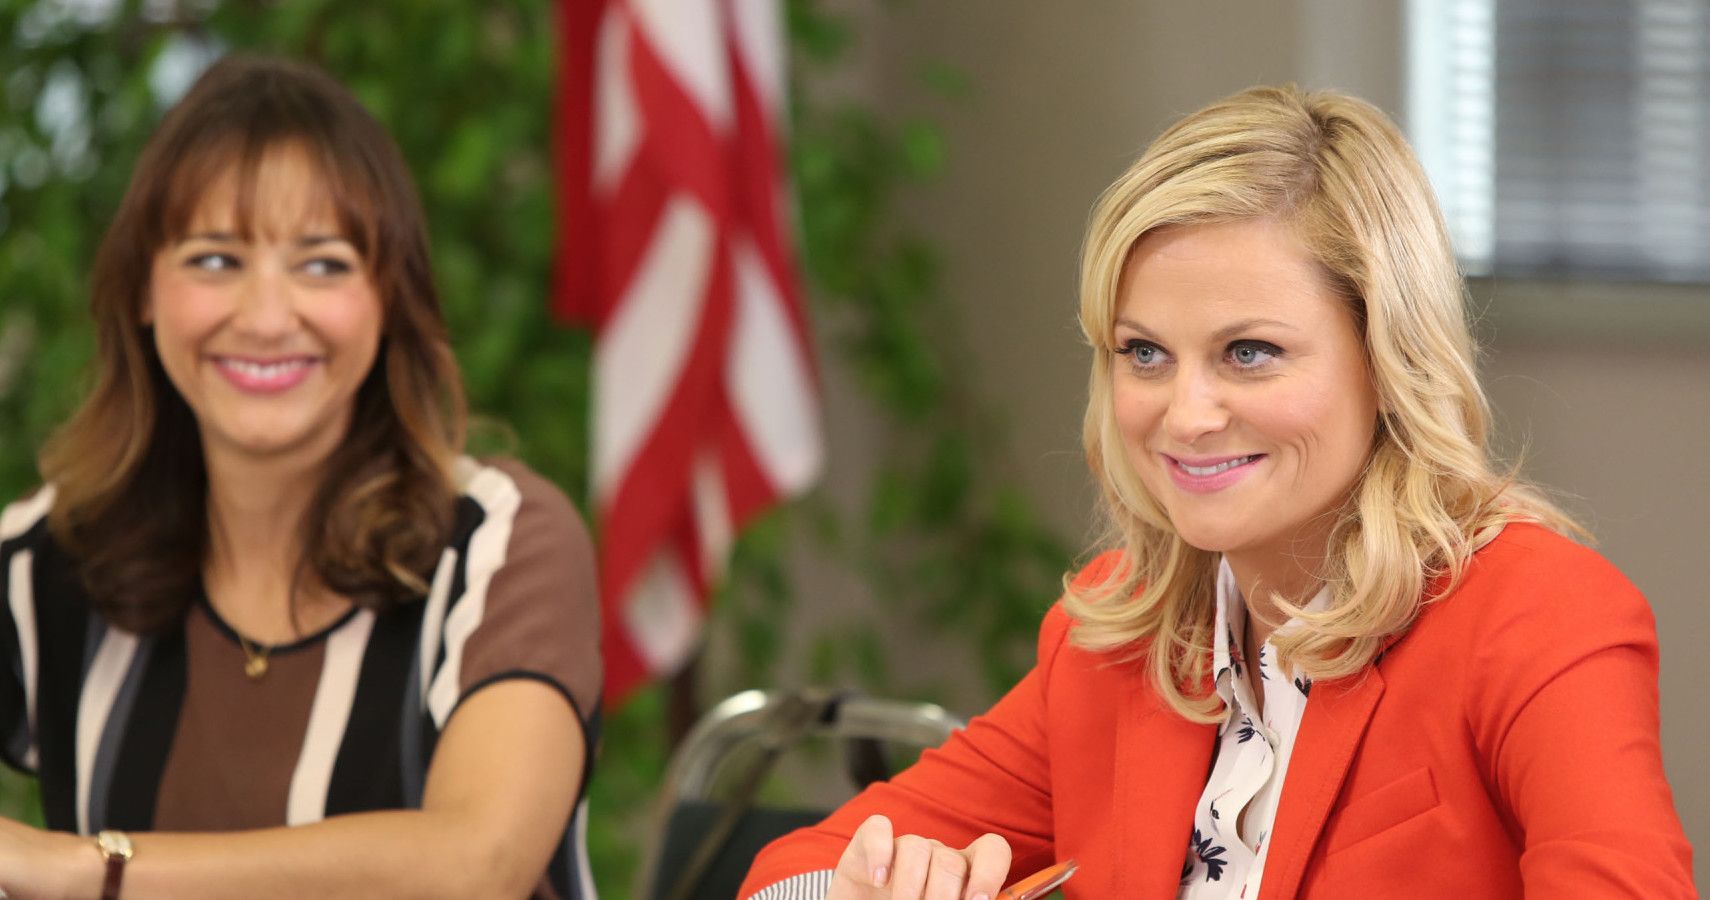 Parks & Recreation - Leslie and Ann smiling at a meeting